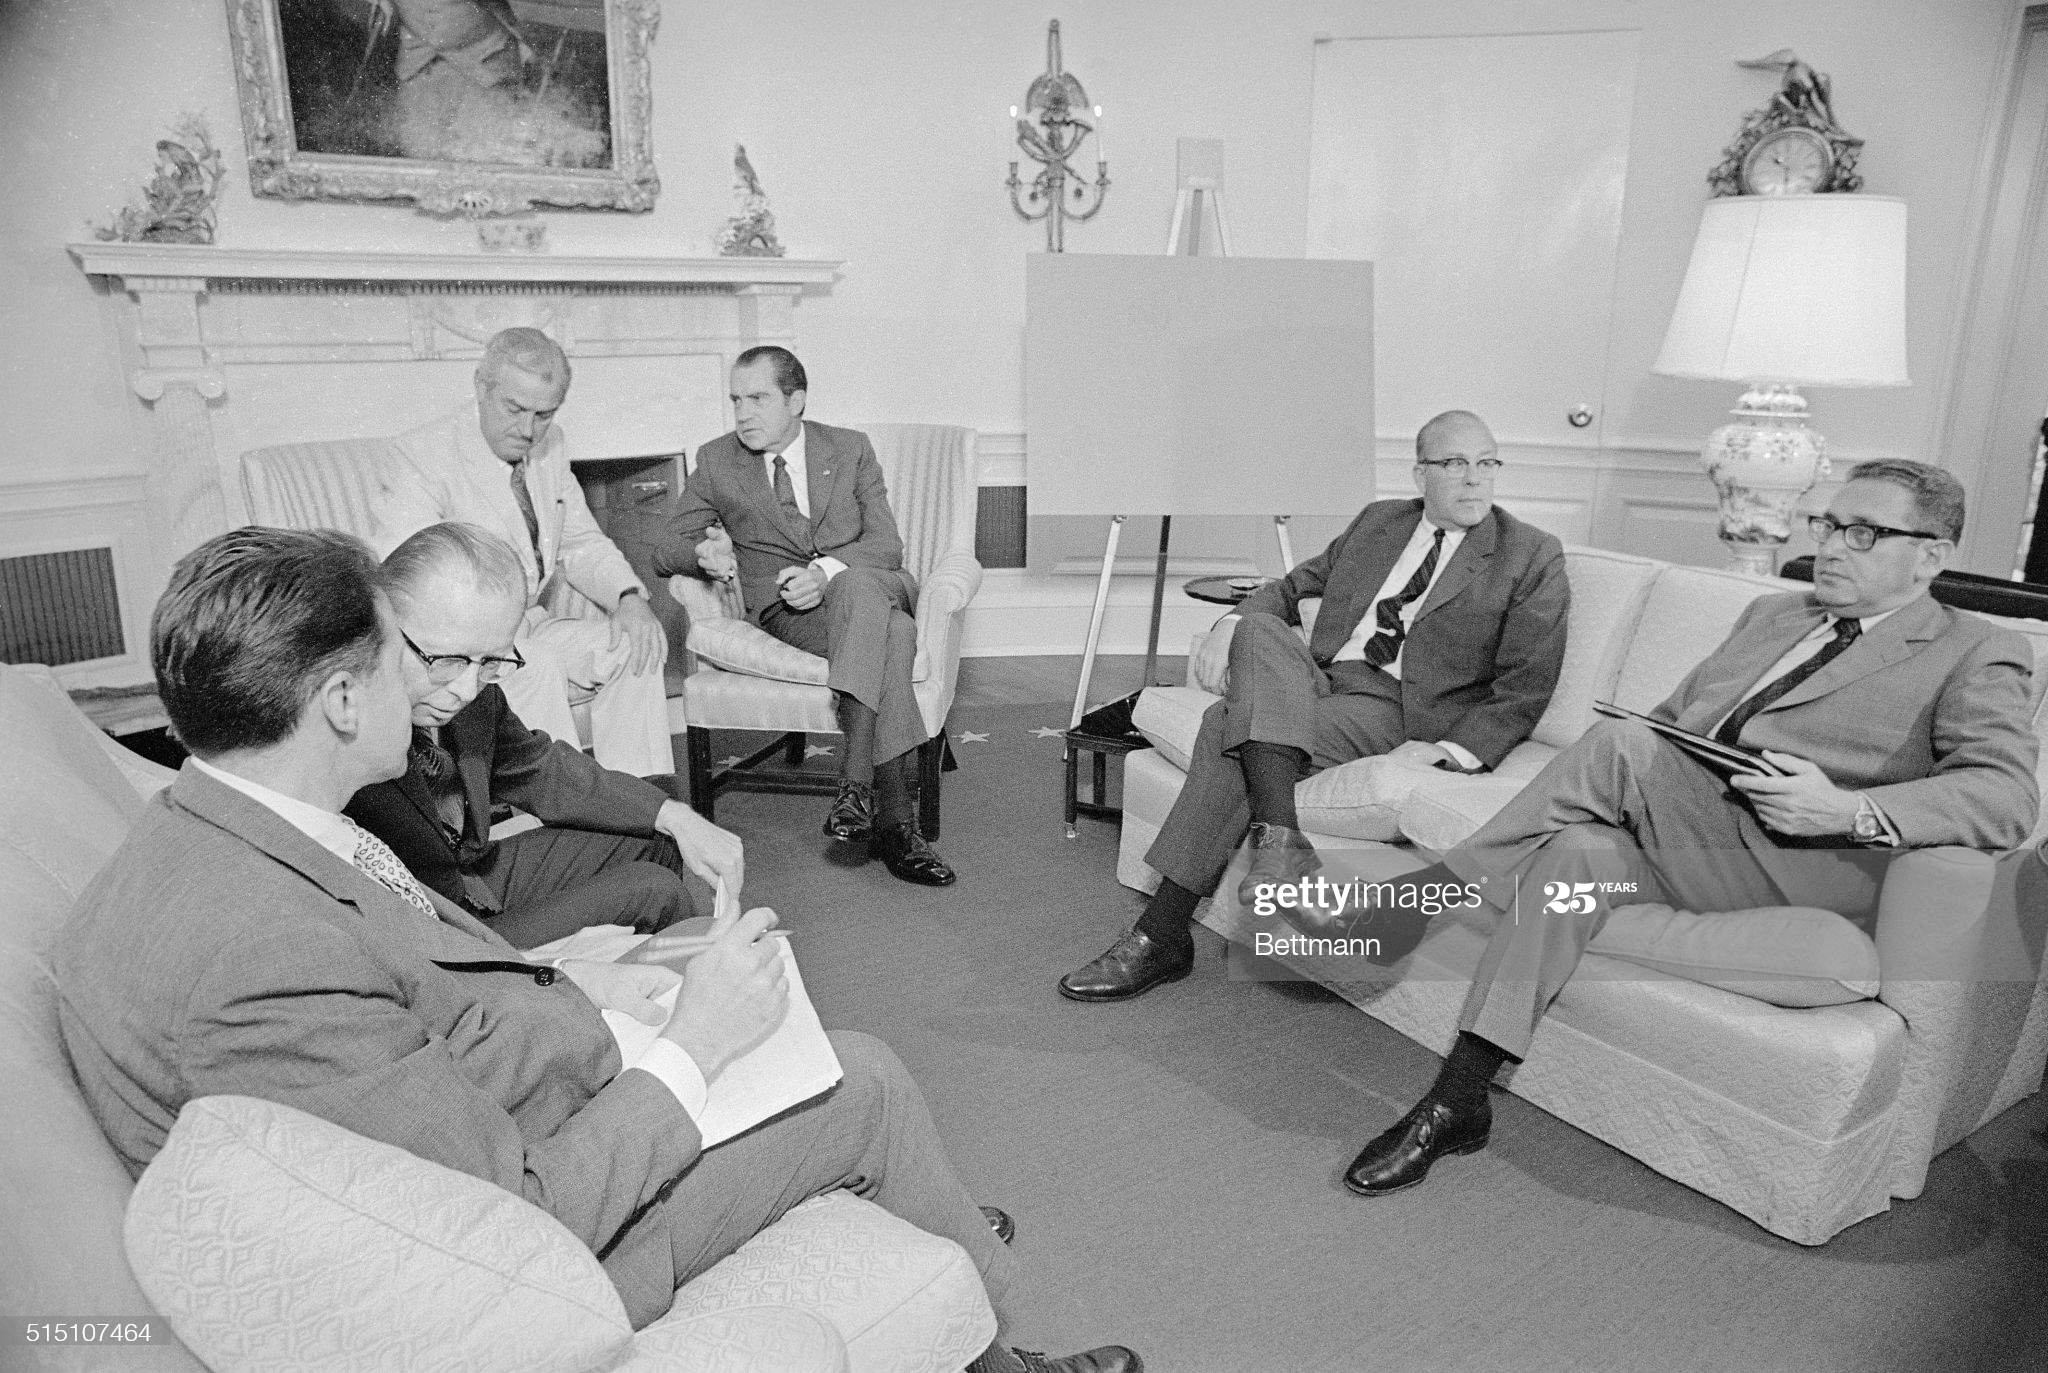 On Aug. 13-15, 1971, President Nixon and his top economic advisors met at Camp David to plot how to take America off the gold standard.